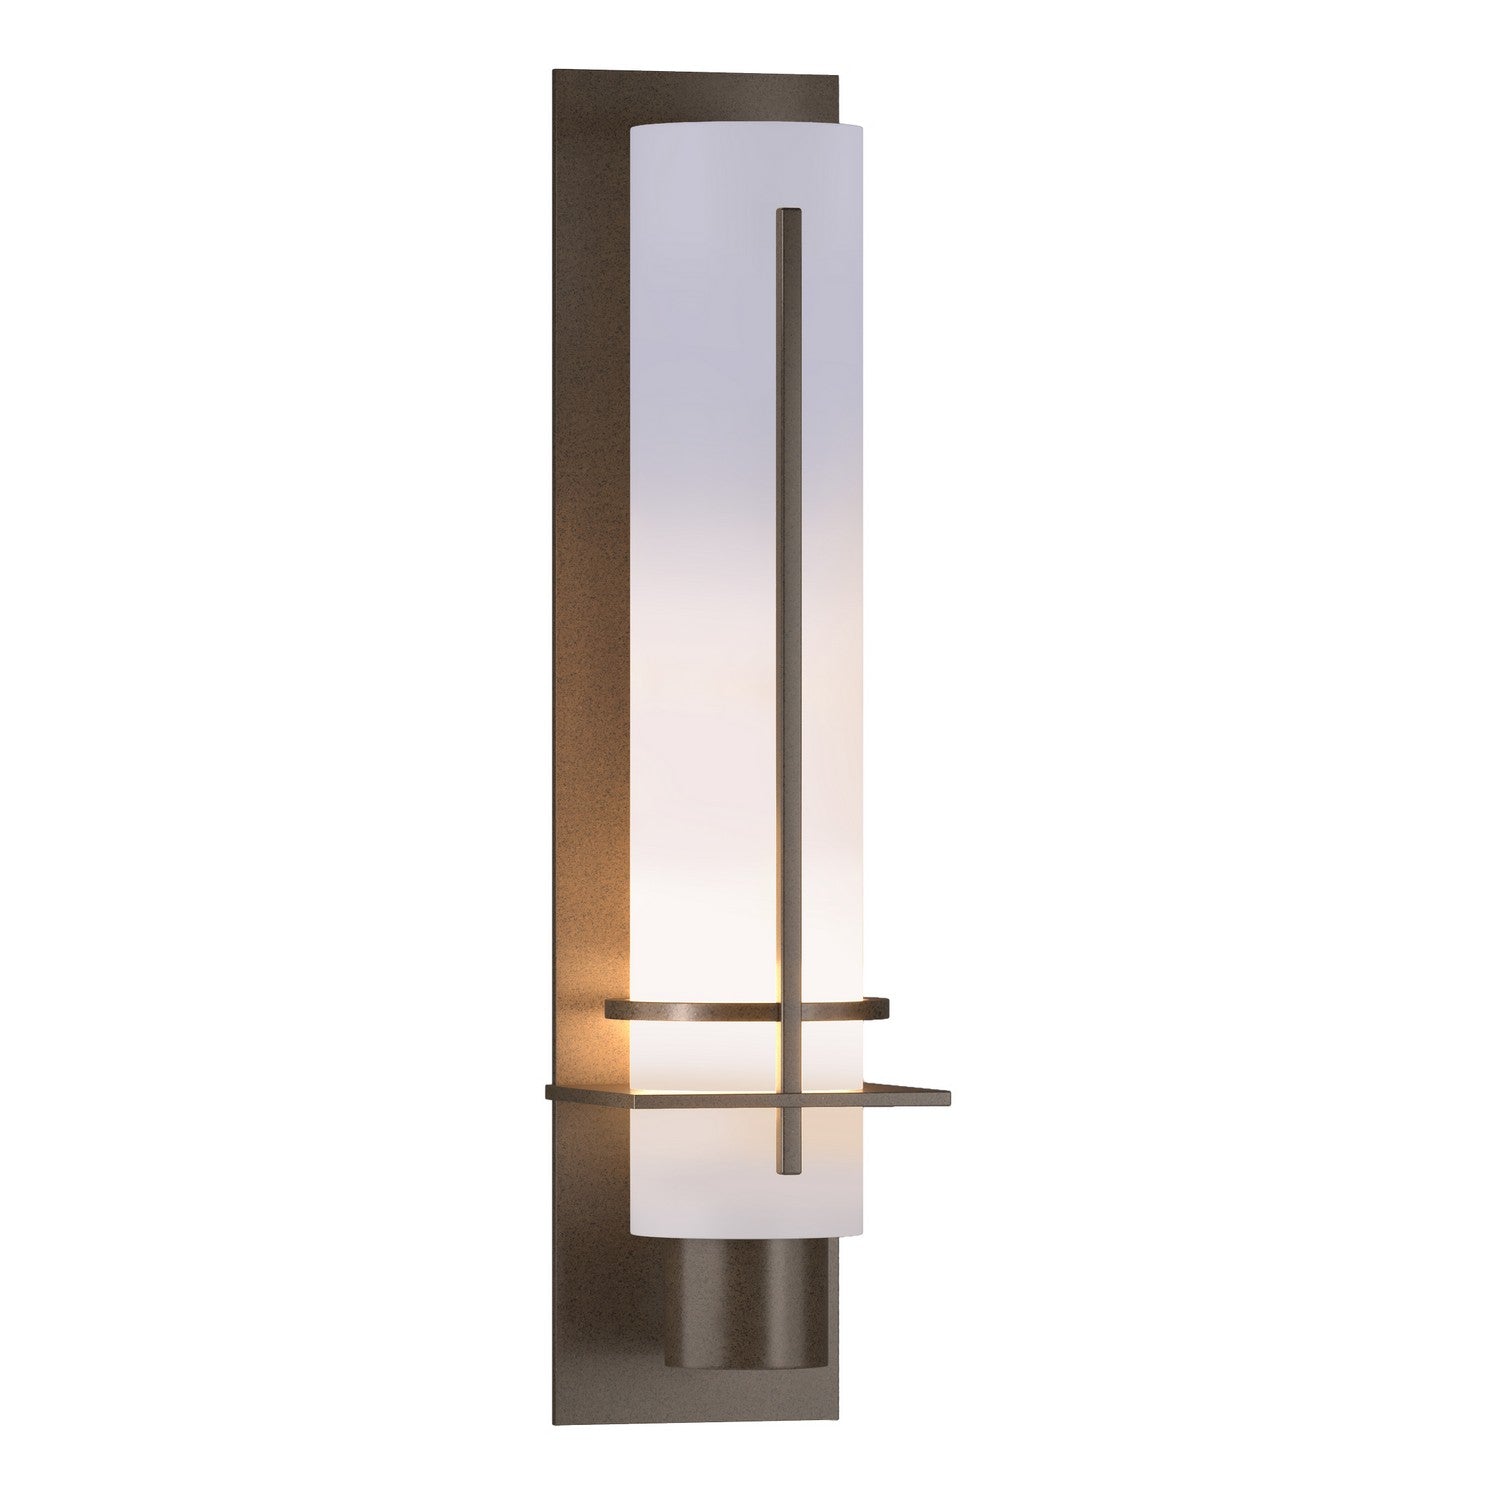 Hubbardton Forge - 207858-SKT-05-GG0173 - One Light Wall Sconce - After Hours - Bronze